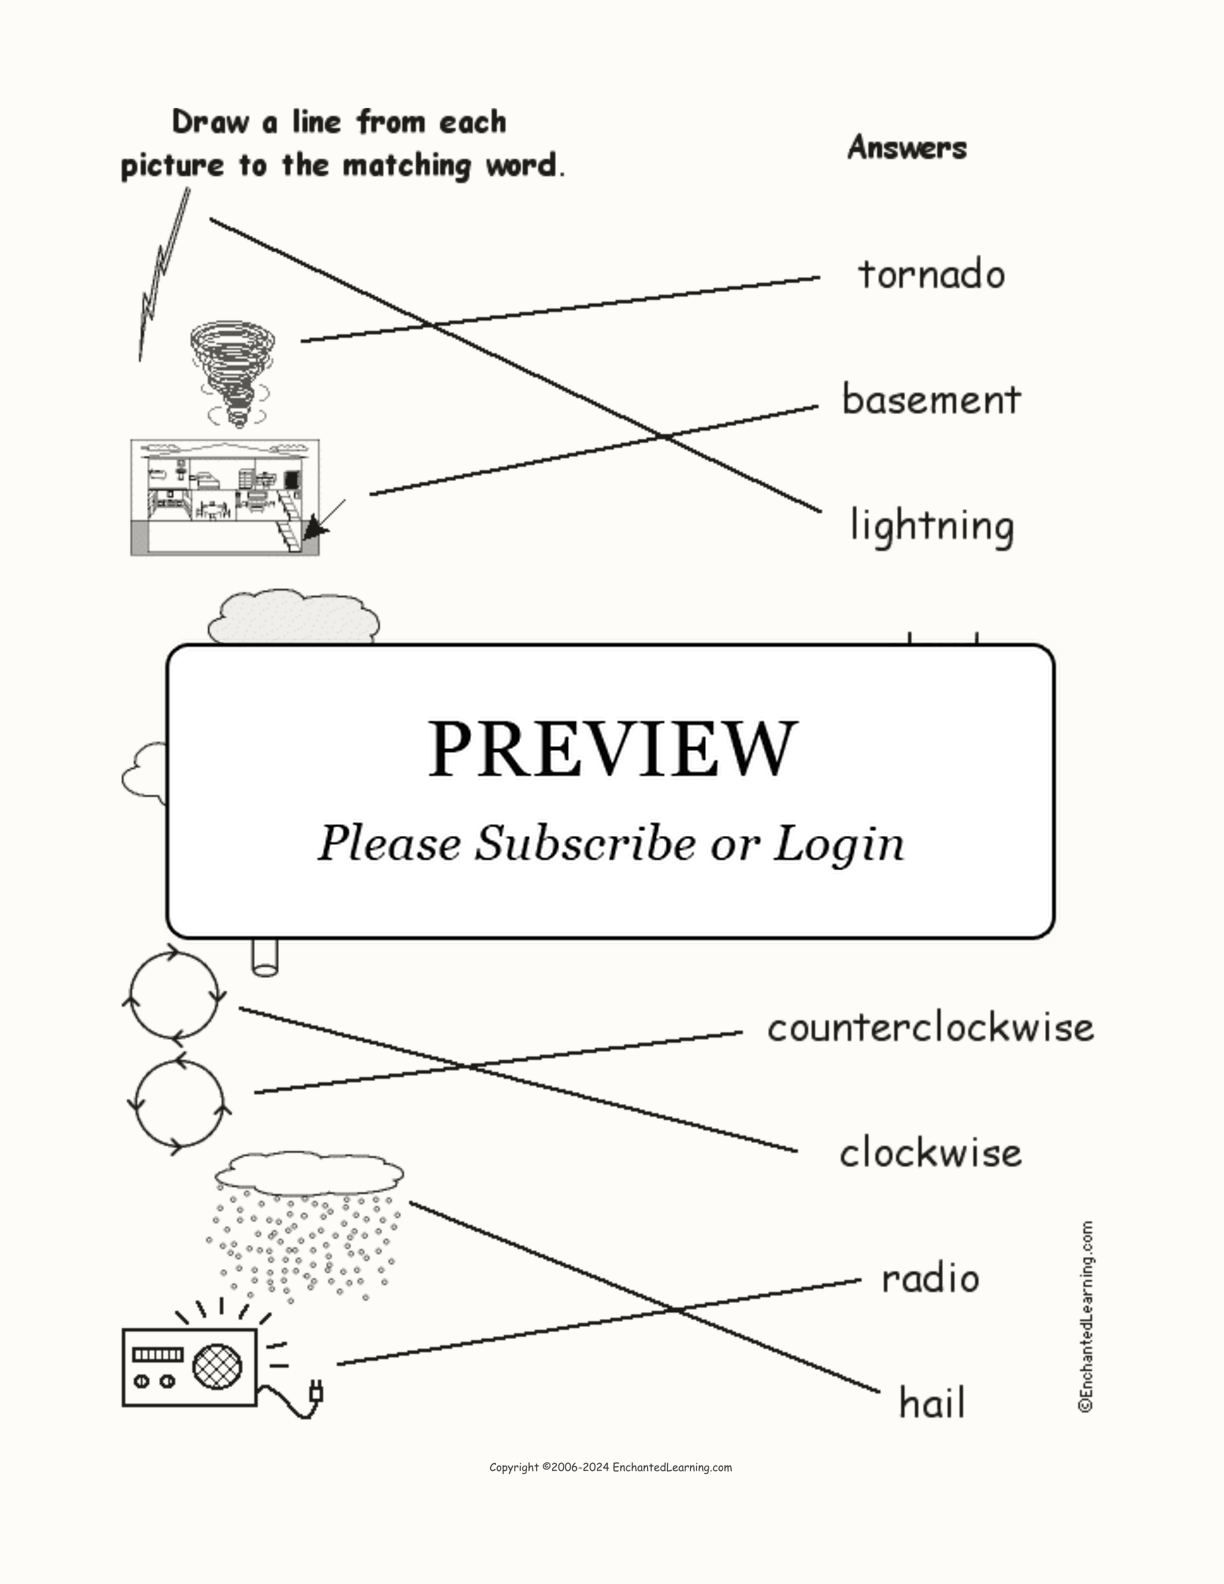 Match Each Tornado Word to its Picture interactive worksheet page 2